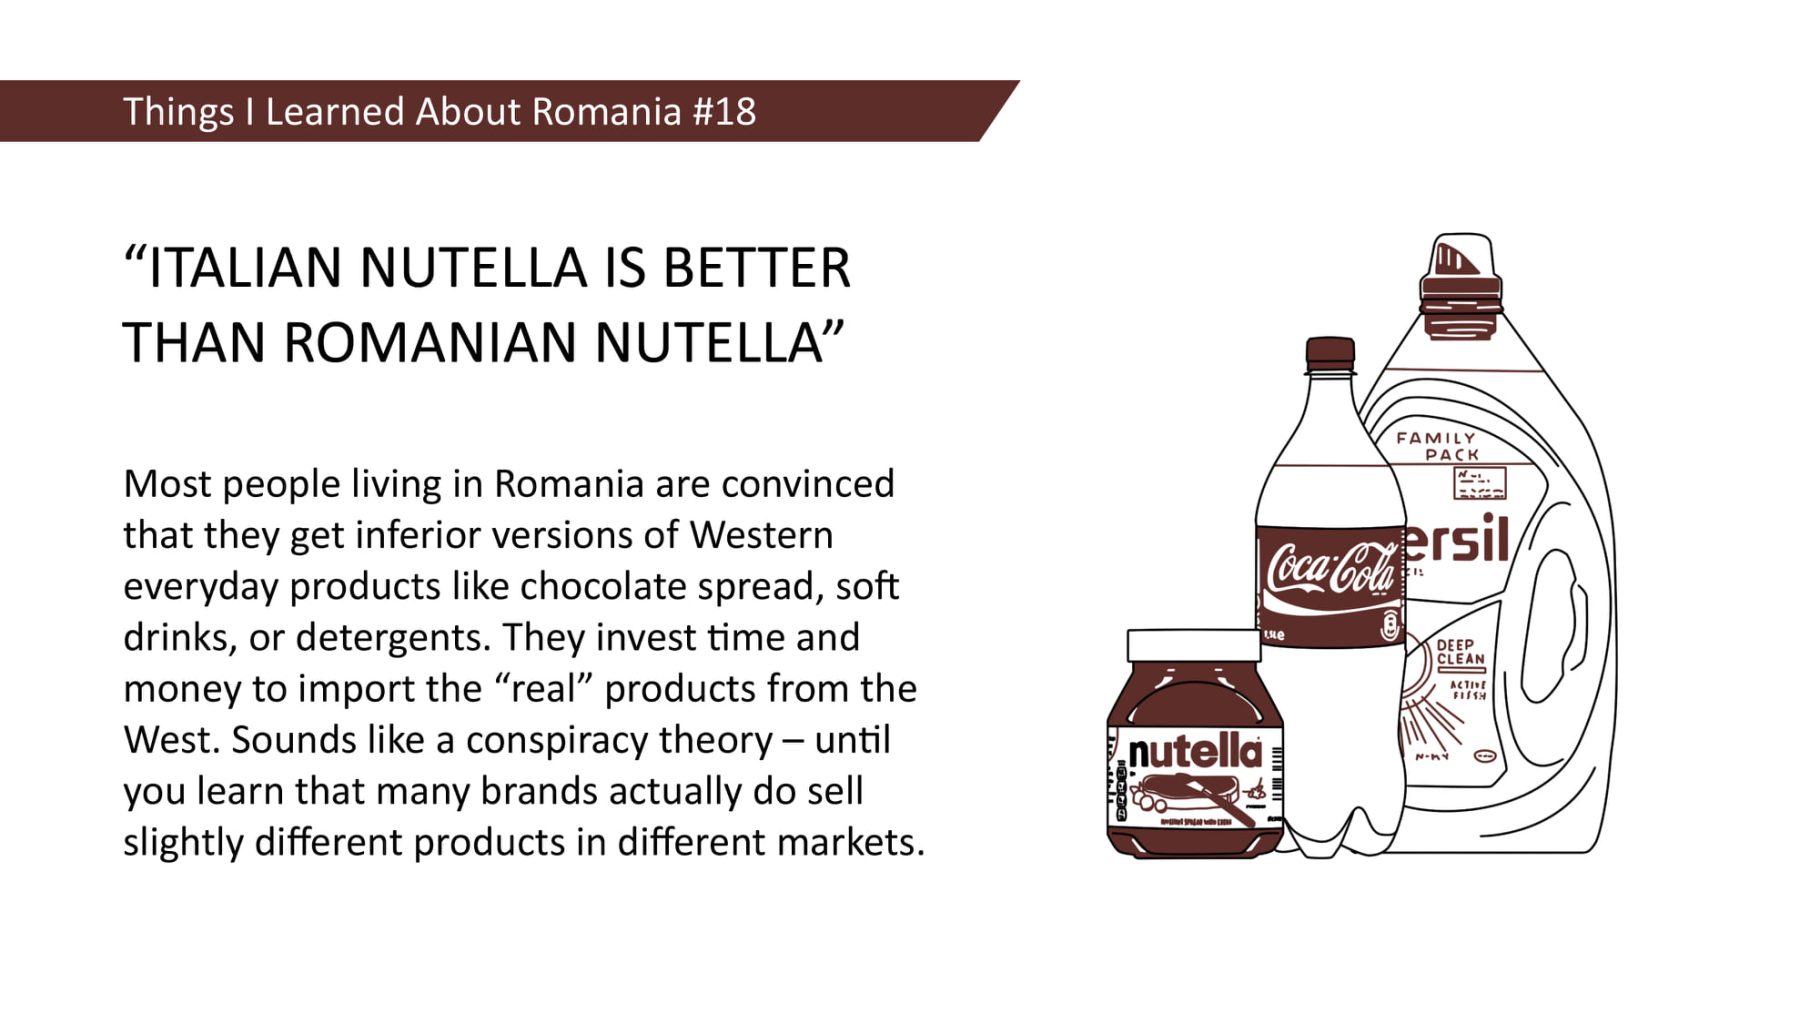 "ITALIAN NUTELLA IS BETTER THAN ROMANIAN NUTELLA" Most people living in Romania are convinced that they get inferior versions of Western everyday products like chocolate spread, soft drinks, or detergents. They invest time and money to import the "real" products from the West. Sounds like a conspiracy theory - until you learn that many brands actually do sell slightly different products in different markets.